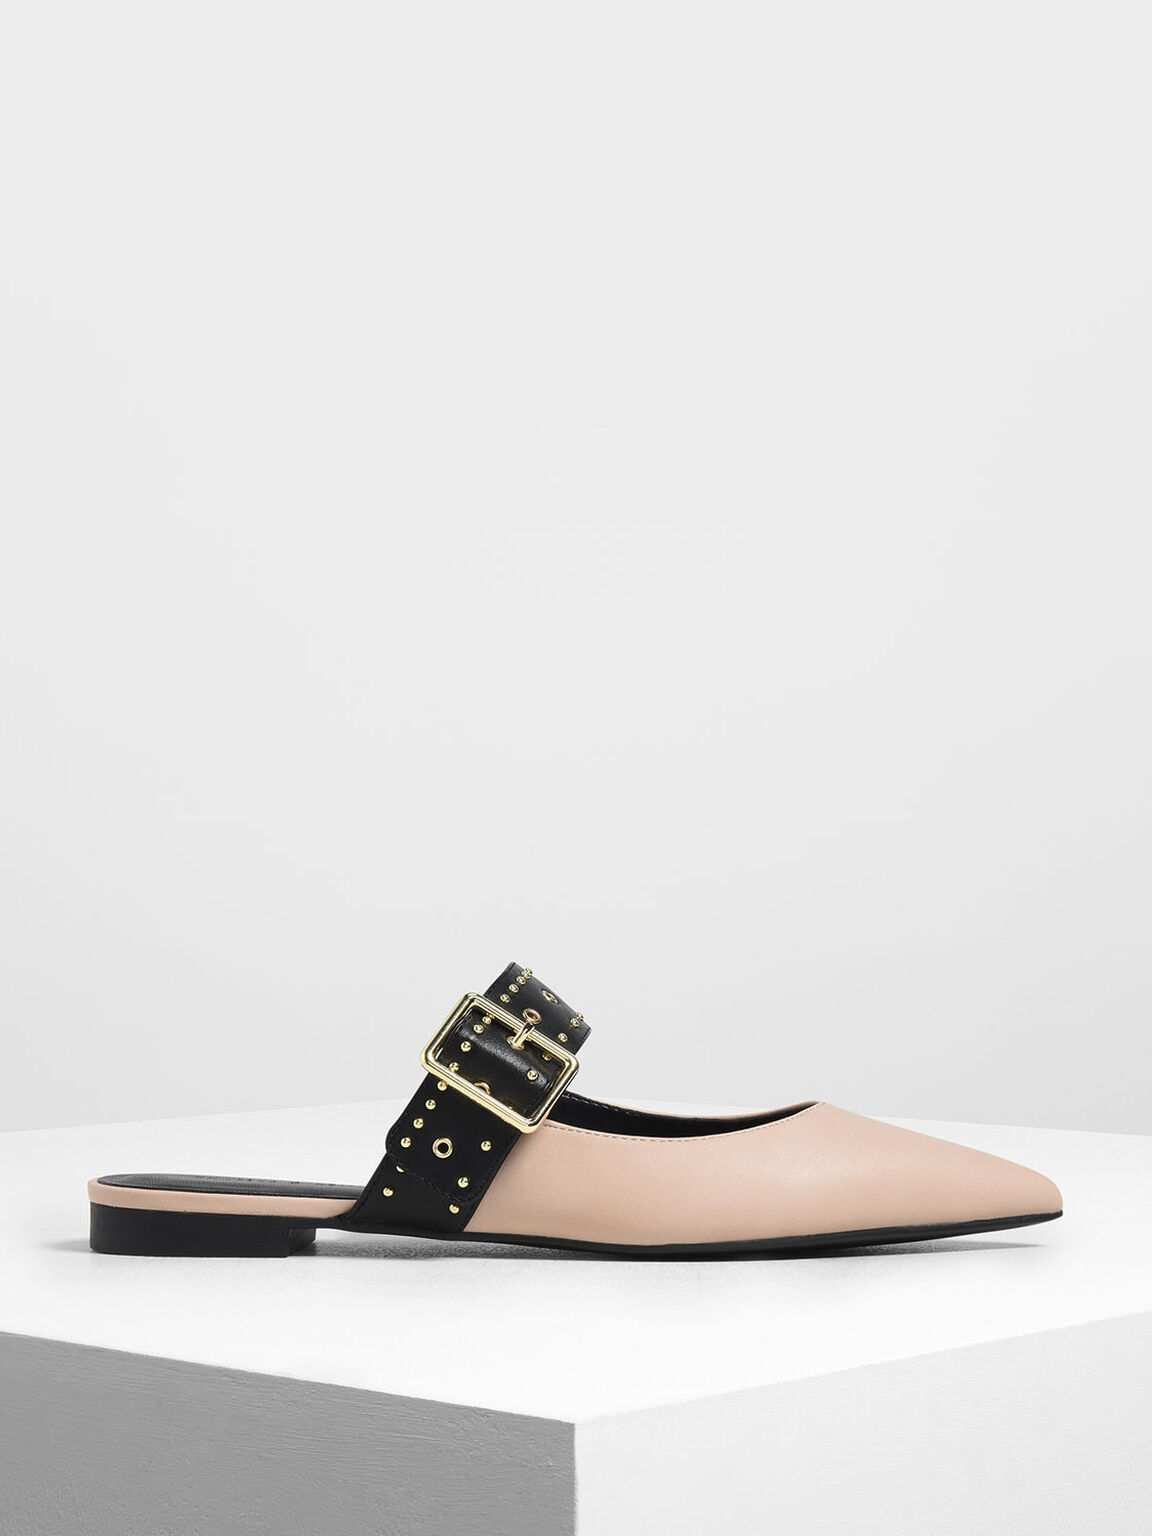 Studded Buckle Mules, Light Pink, hi-res